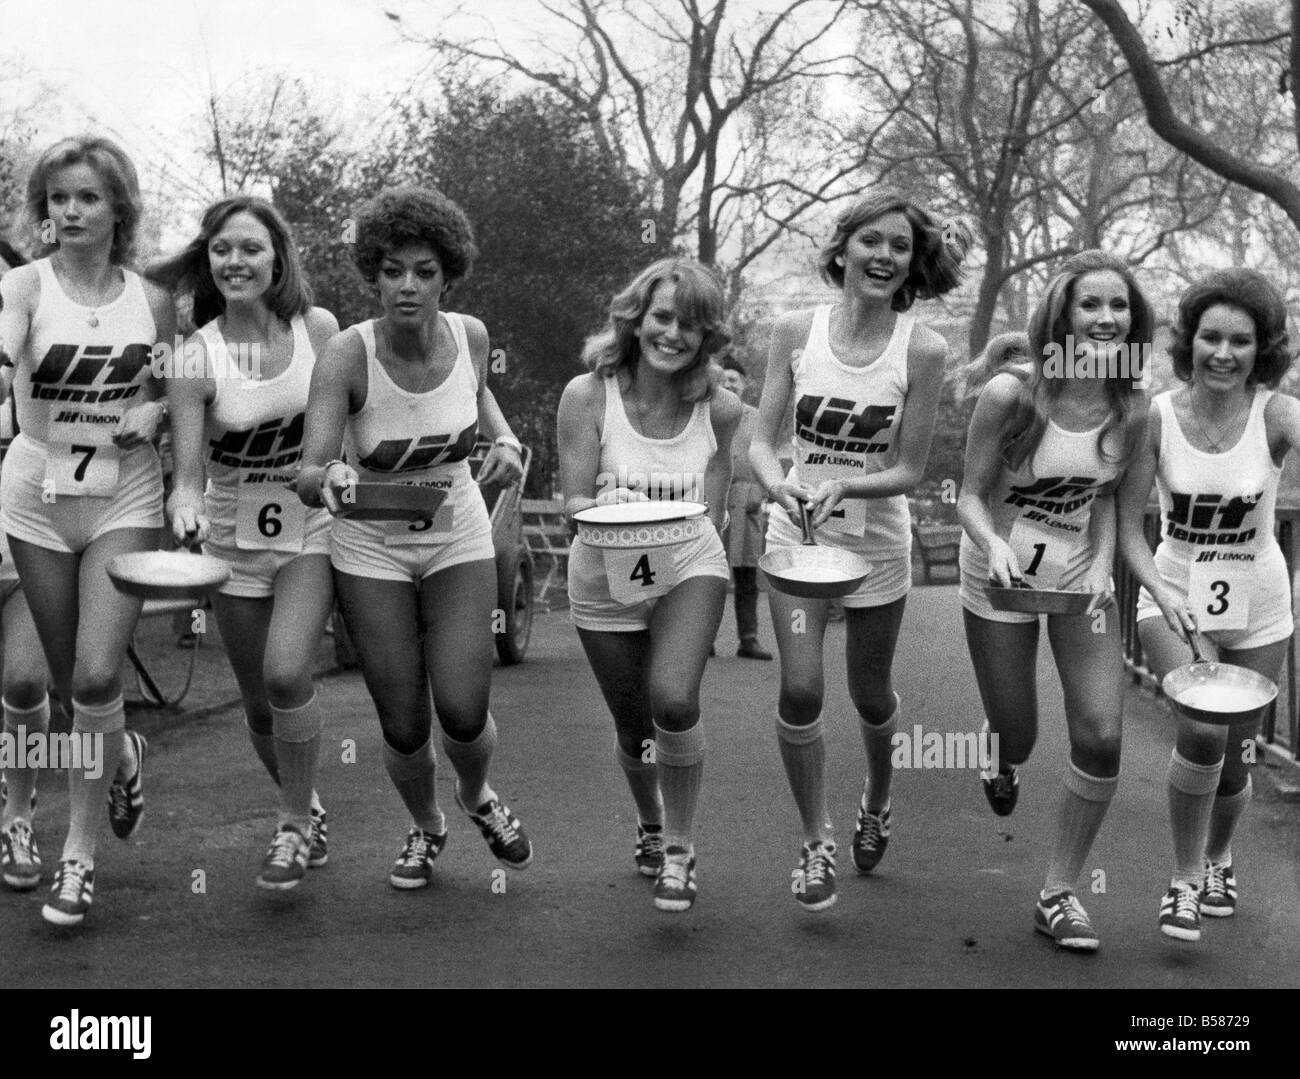 The start of the pancake race I/R Caroline Meade, Marilyn Ward, Gay Leary, Pauline Peart, Gaynor Lacey, Zone Spink Deidre Greenland and Sheila Mitchell. February 1975 P005074 Stock Photo